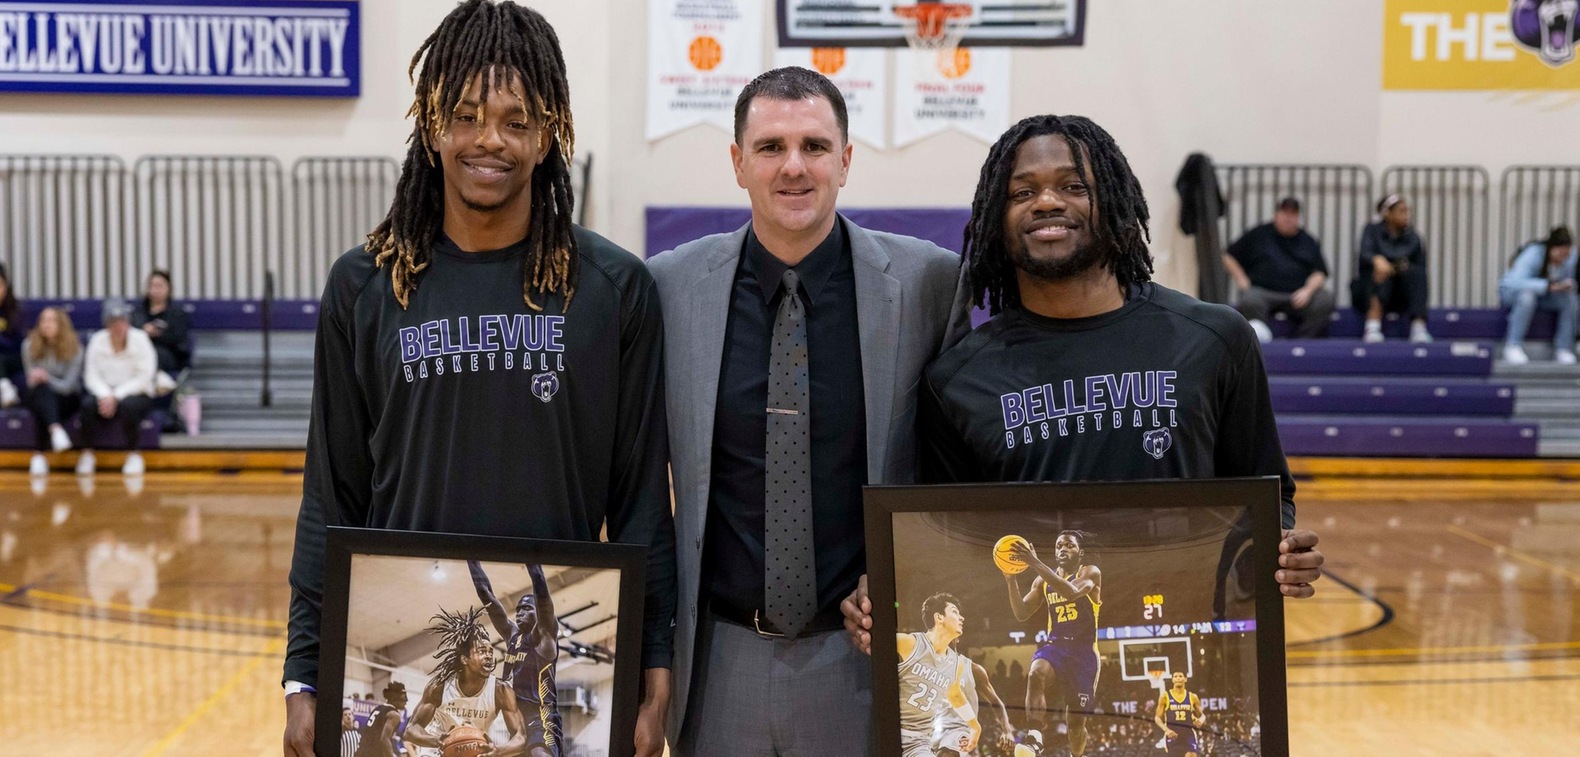 The Bruins' two seniors, Makeem Loudermill and Jerome Bynum, were honored before the contest.